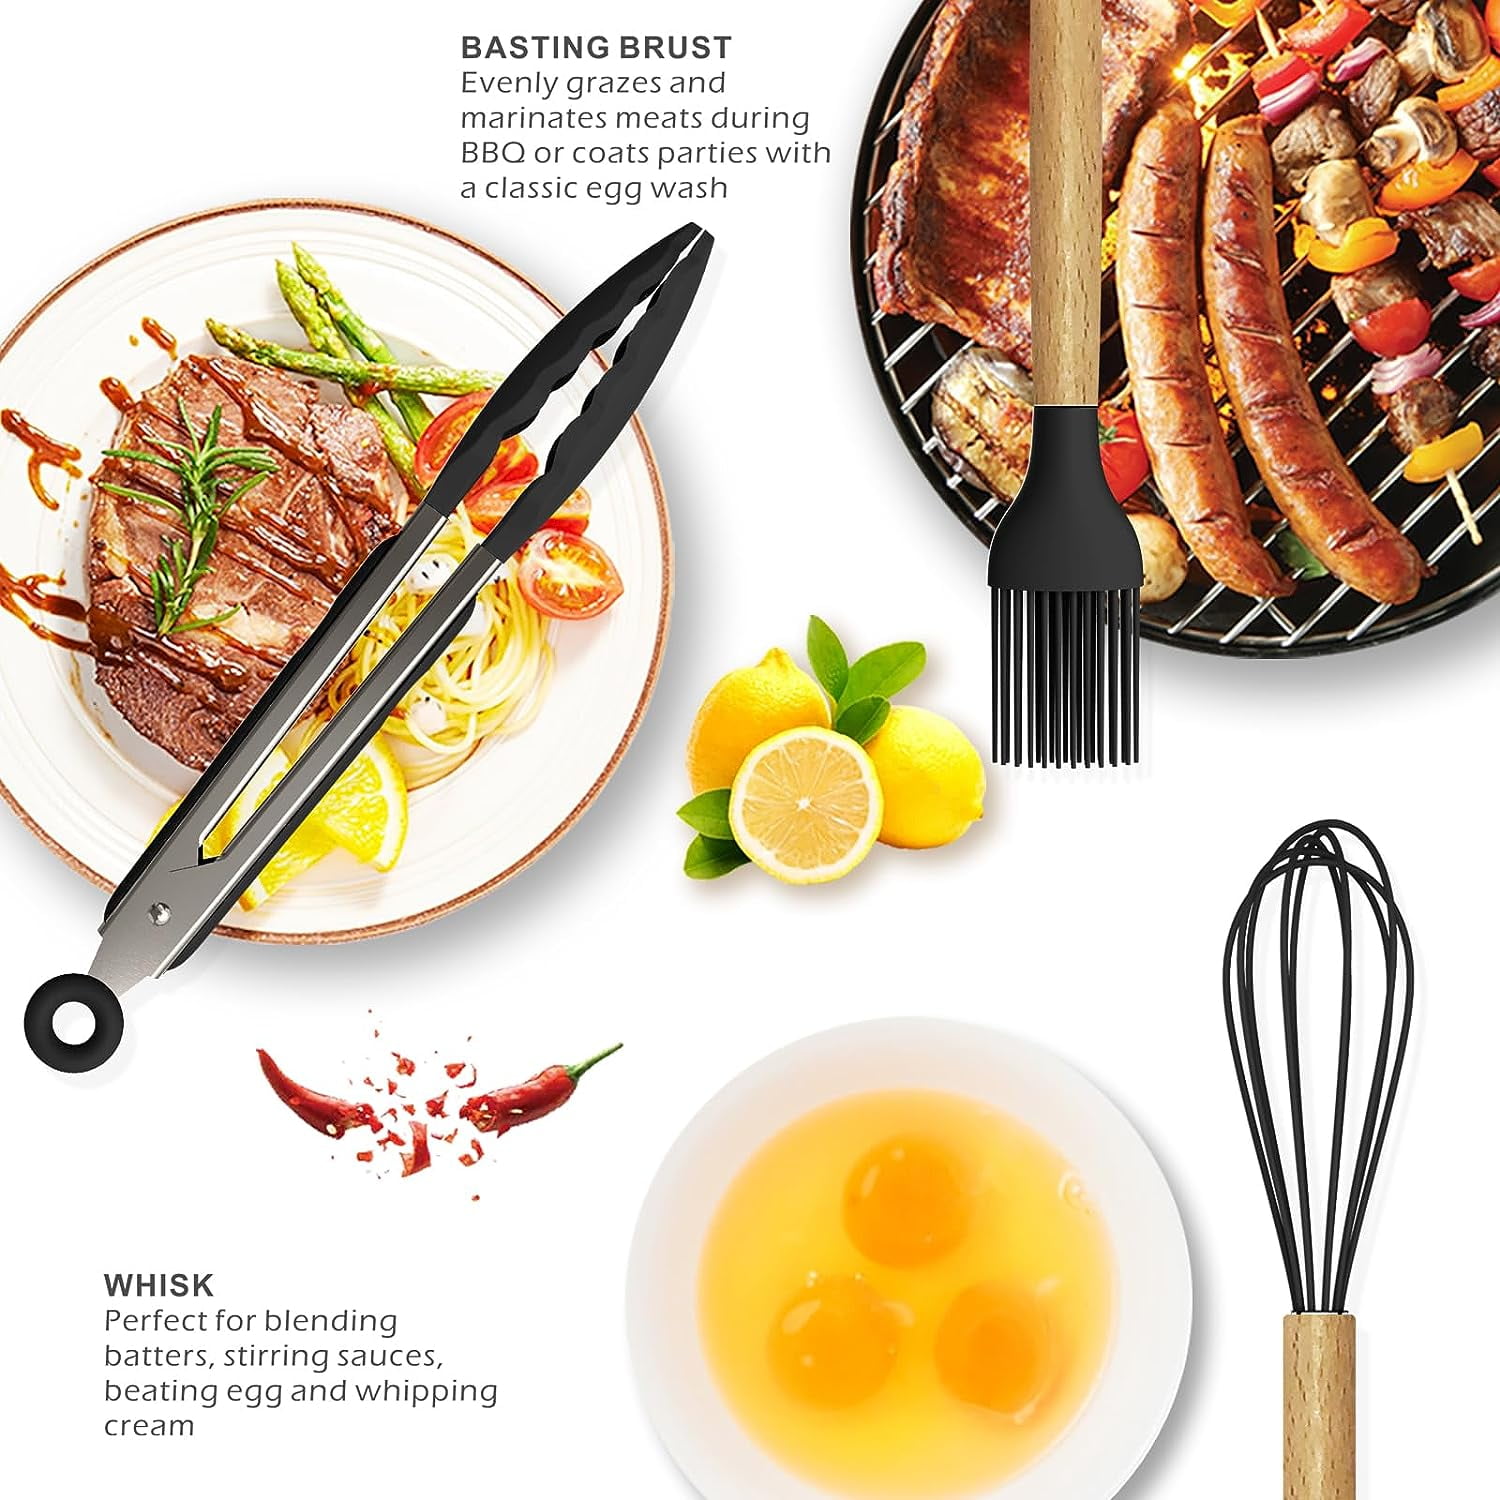 12 of non-stick heat resistant silicon cooking utensils – Reliable